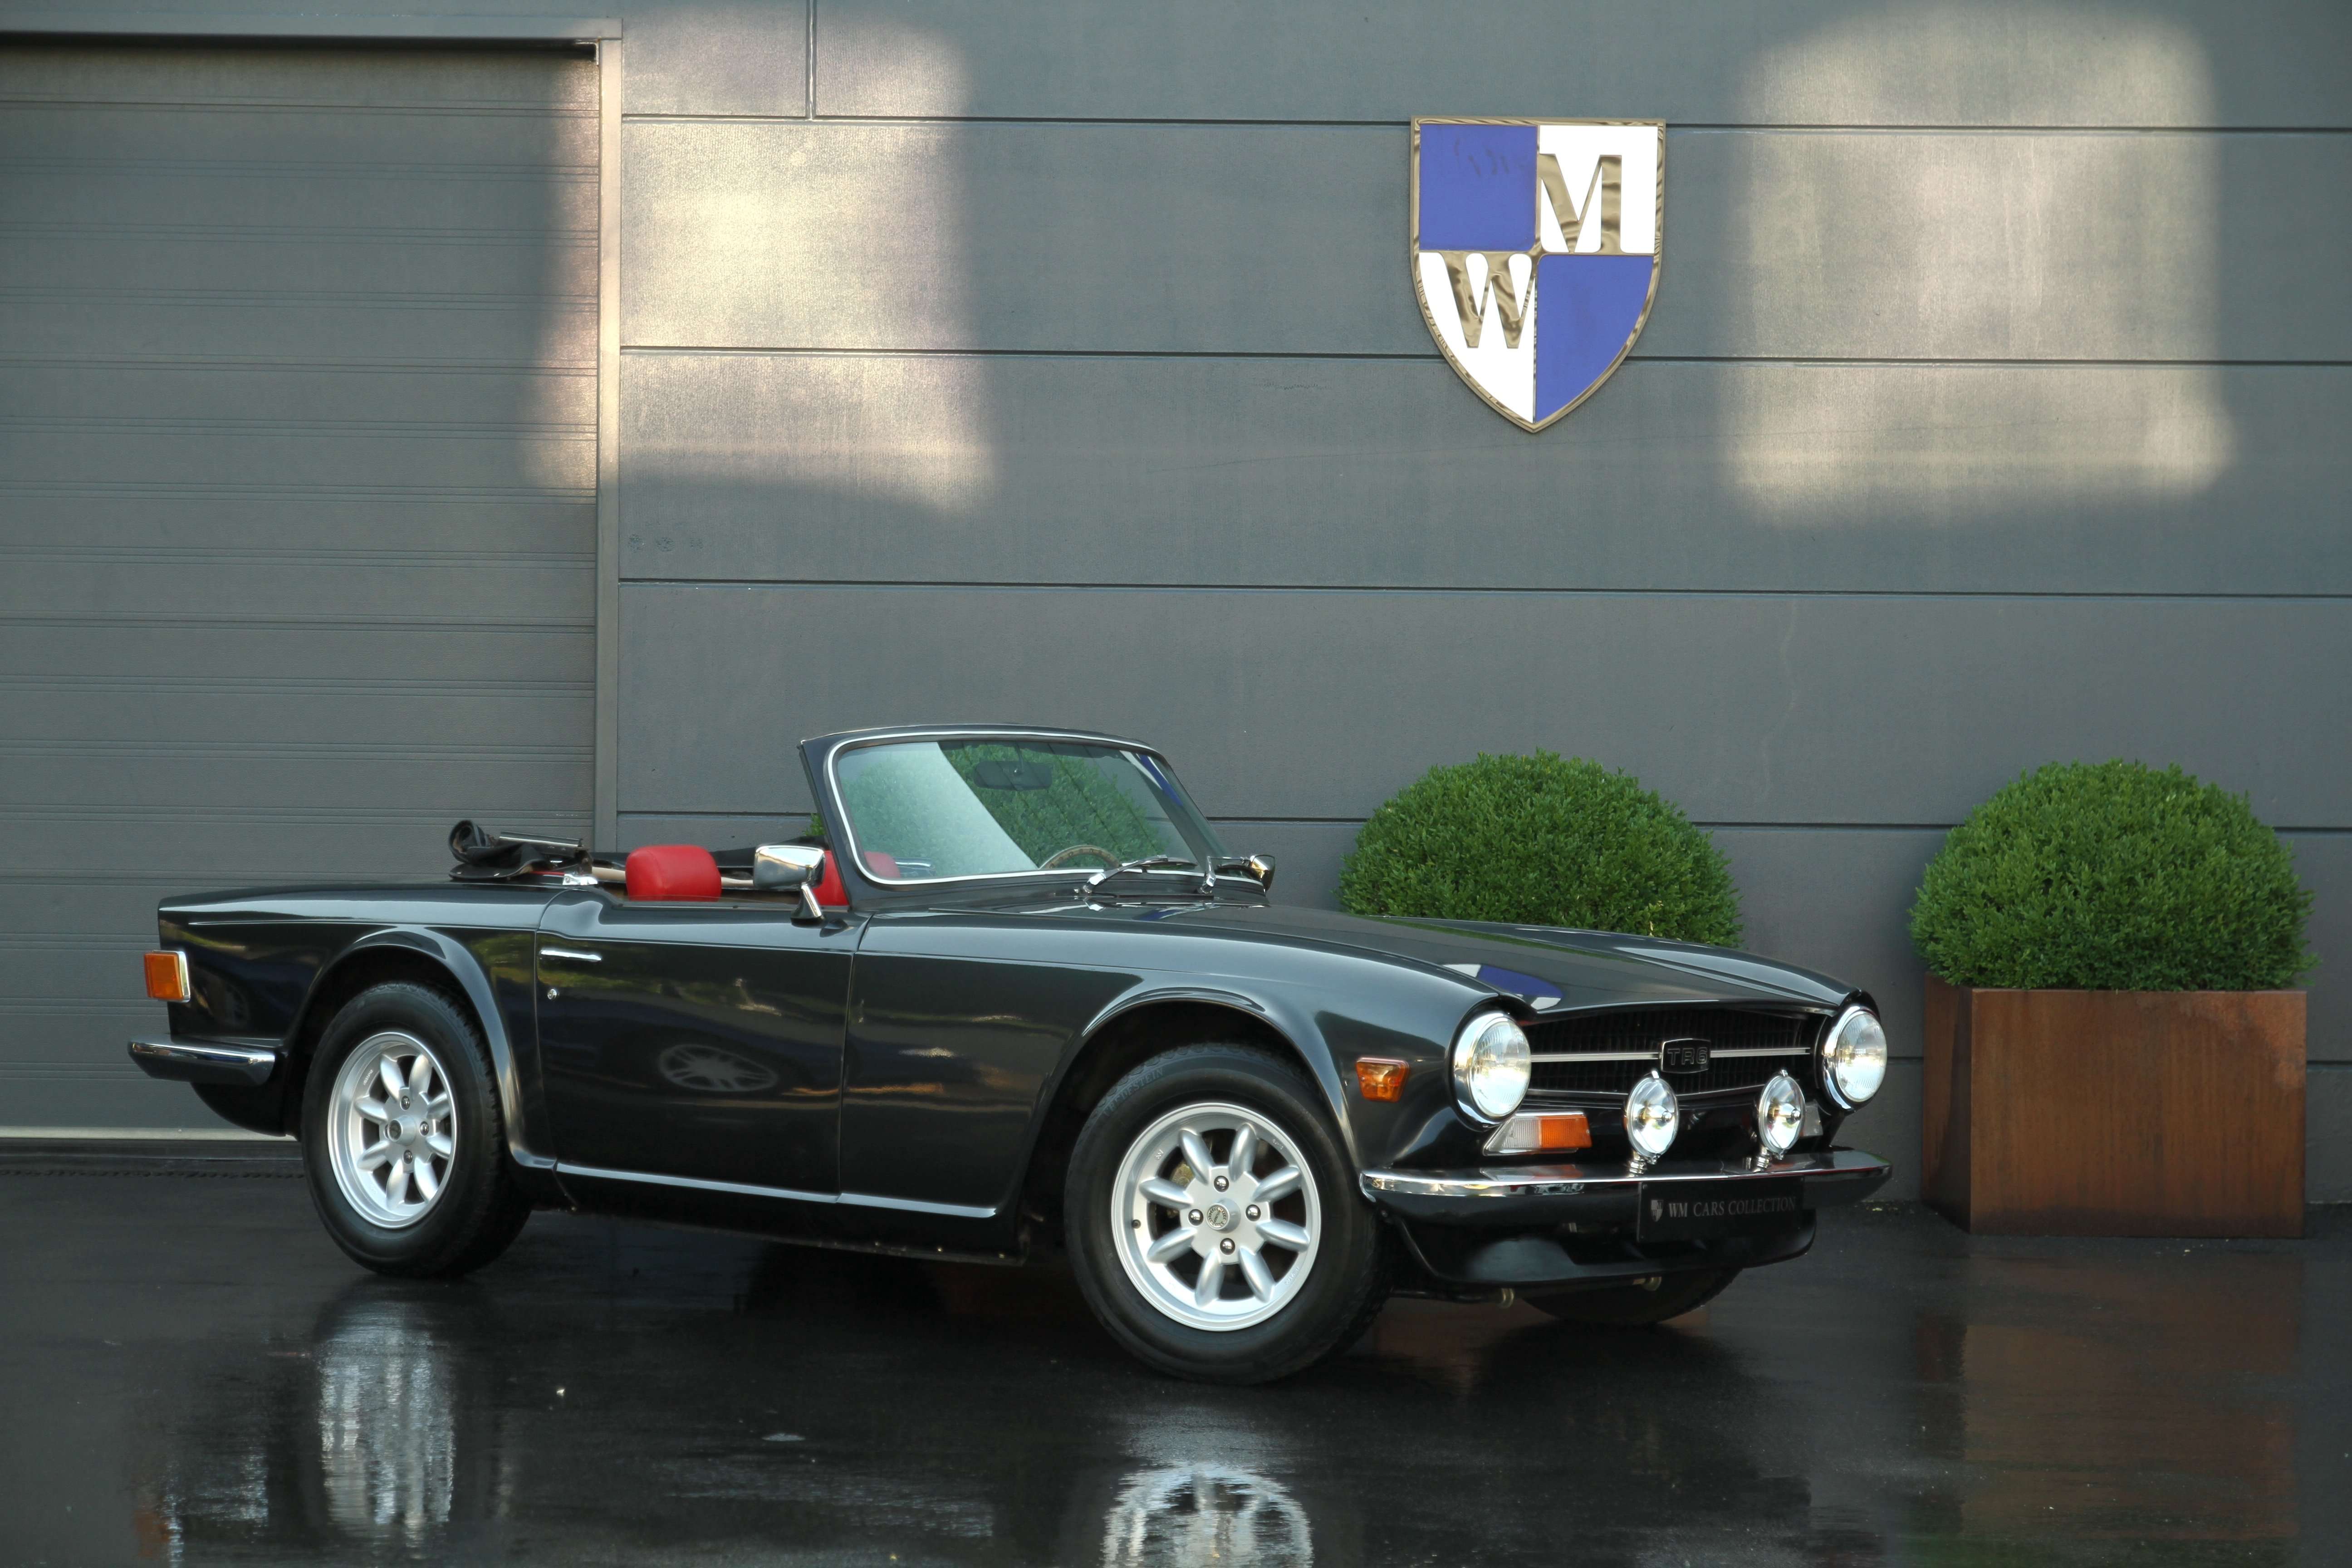 Triumph TR6 Convertible in Grey used in Braine-l'Alleud for € 19,900.-